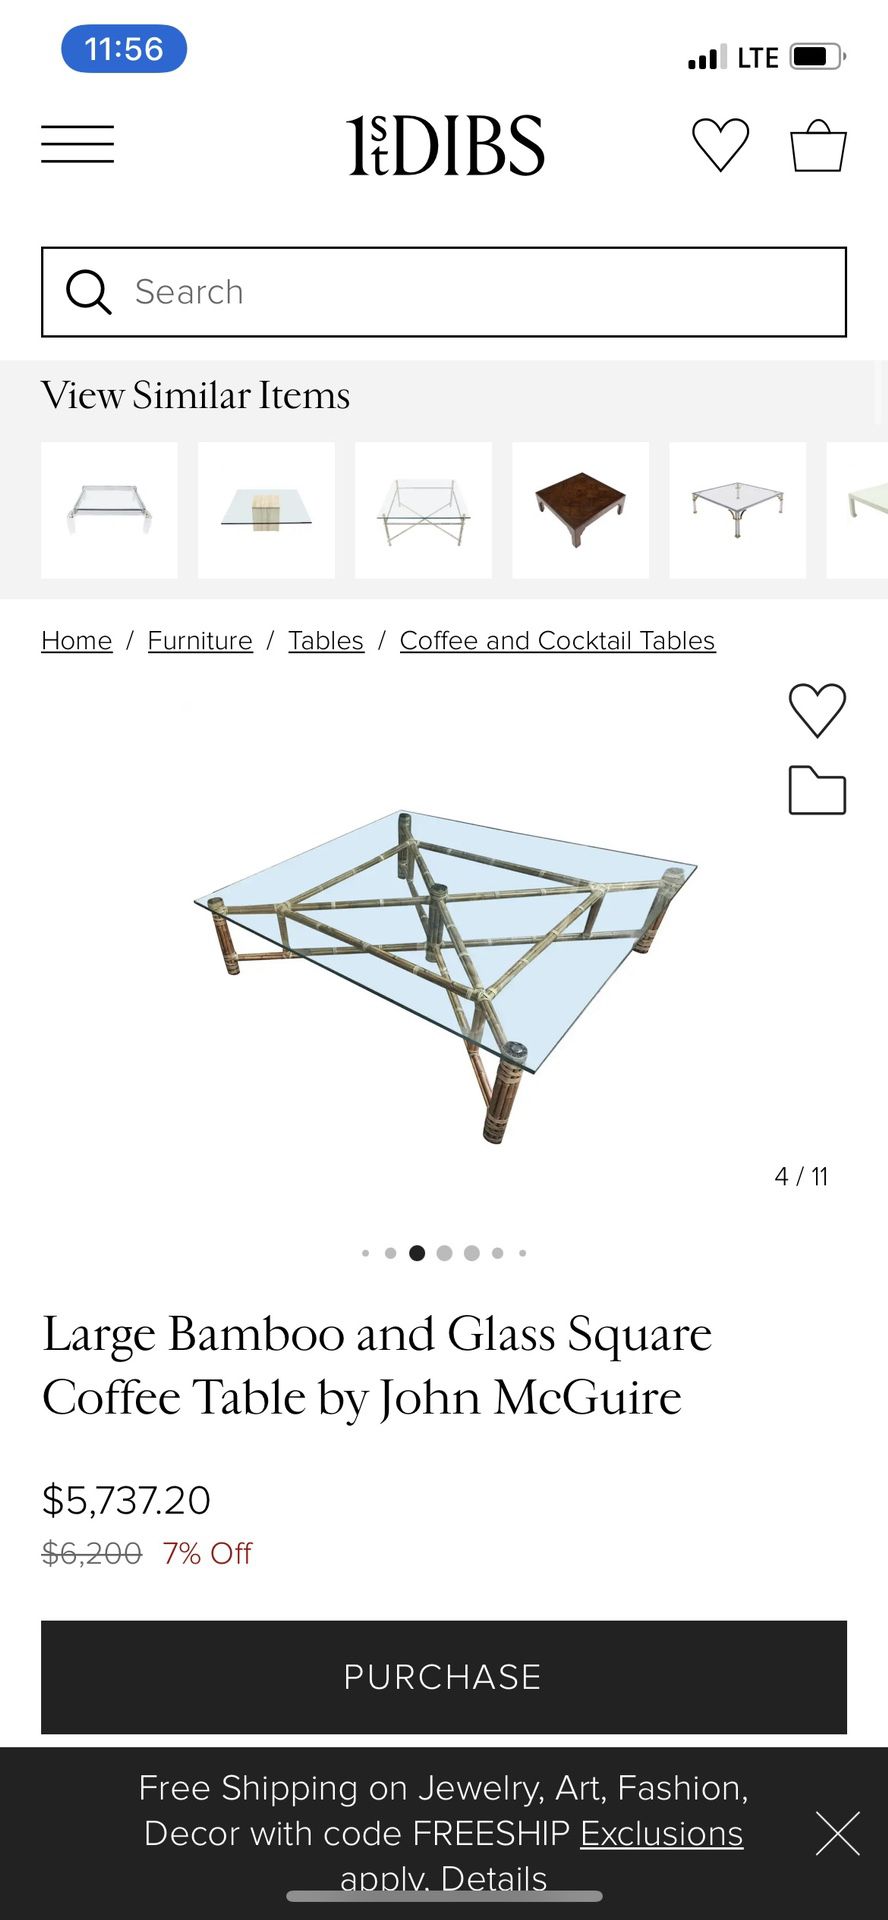 Glass and bamboo Coffee table